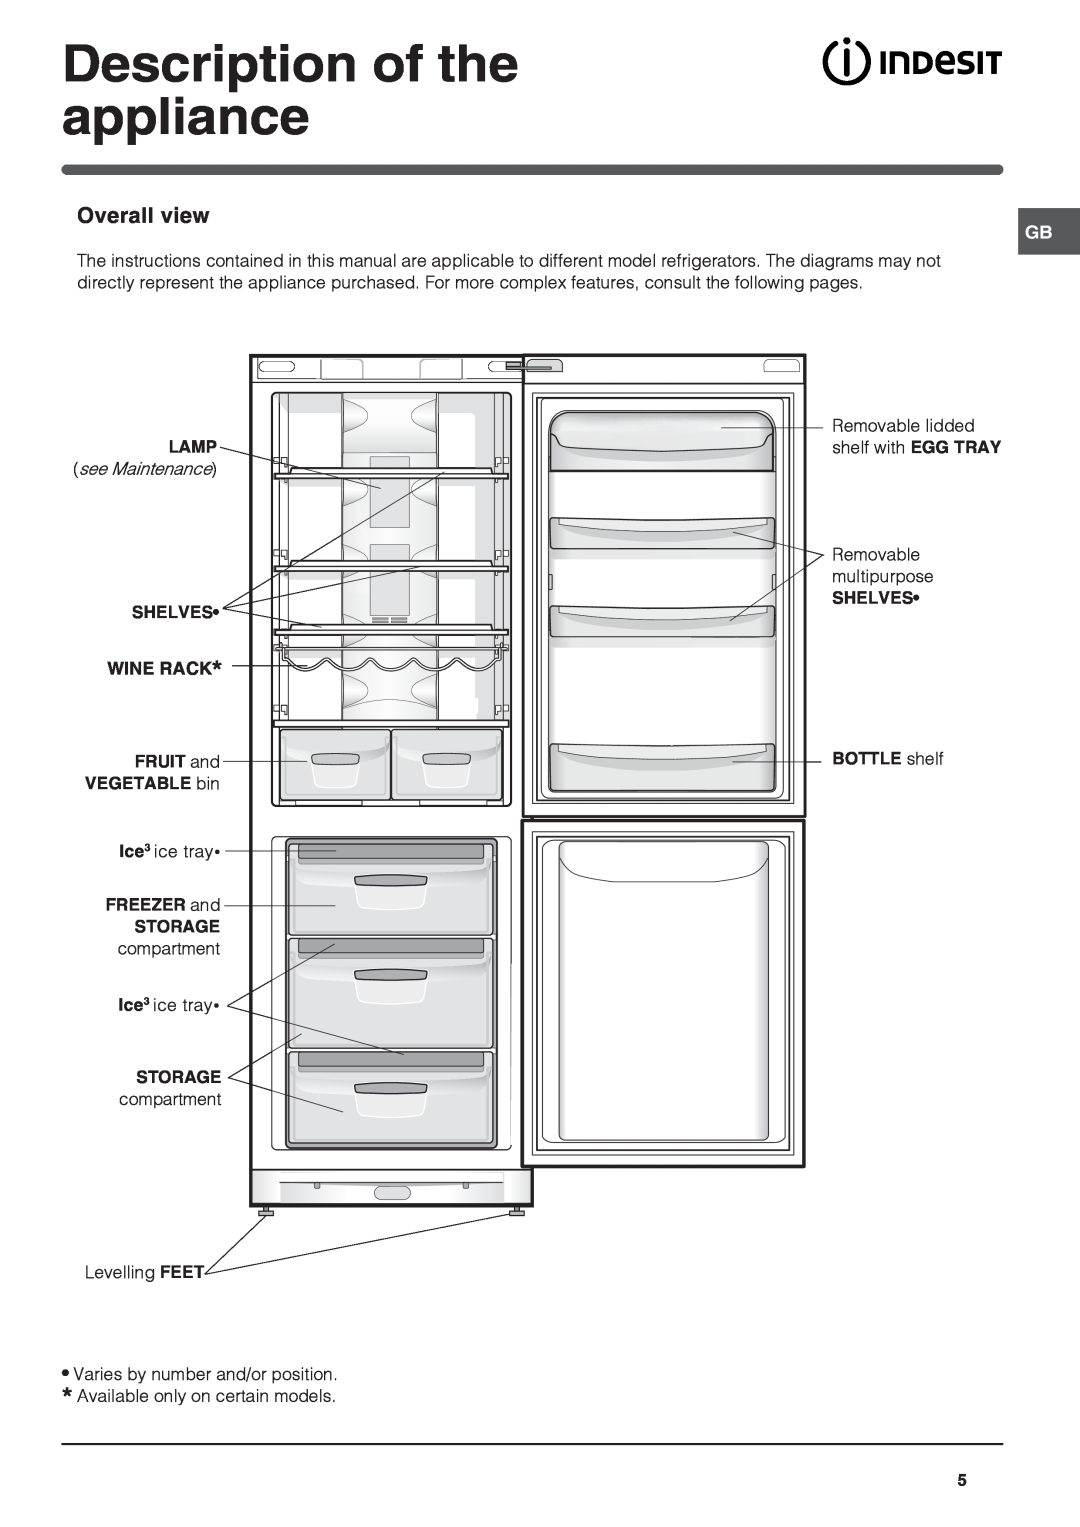 Indesit NBAA 33 NF NX D manual Overall view, Lamp, Shelves Wine Rack, FREEZER and STORAGE compartment, SHELVES BOTTLE shelf 